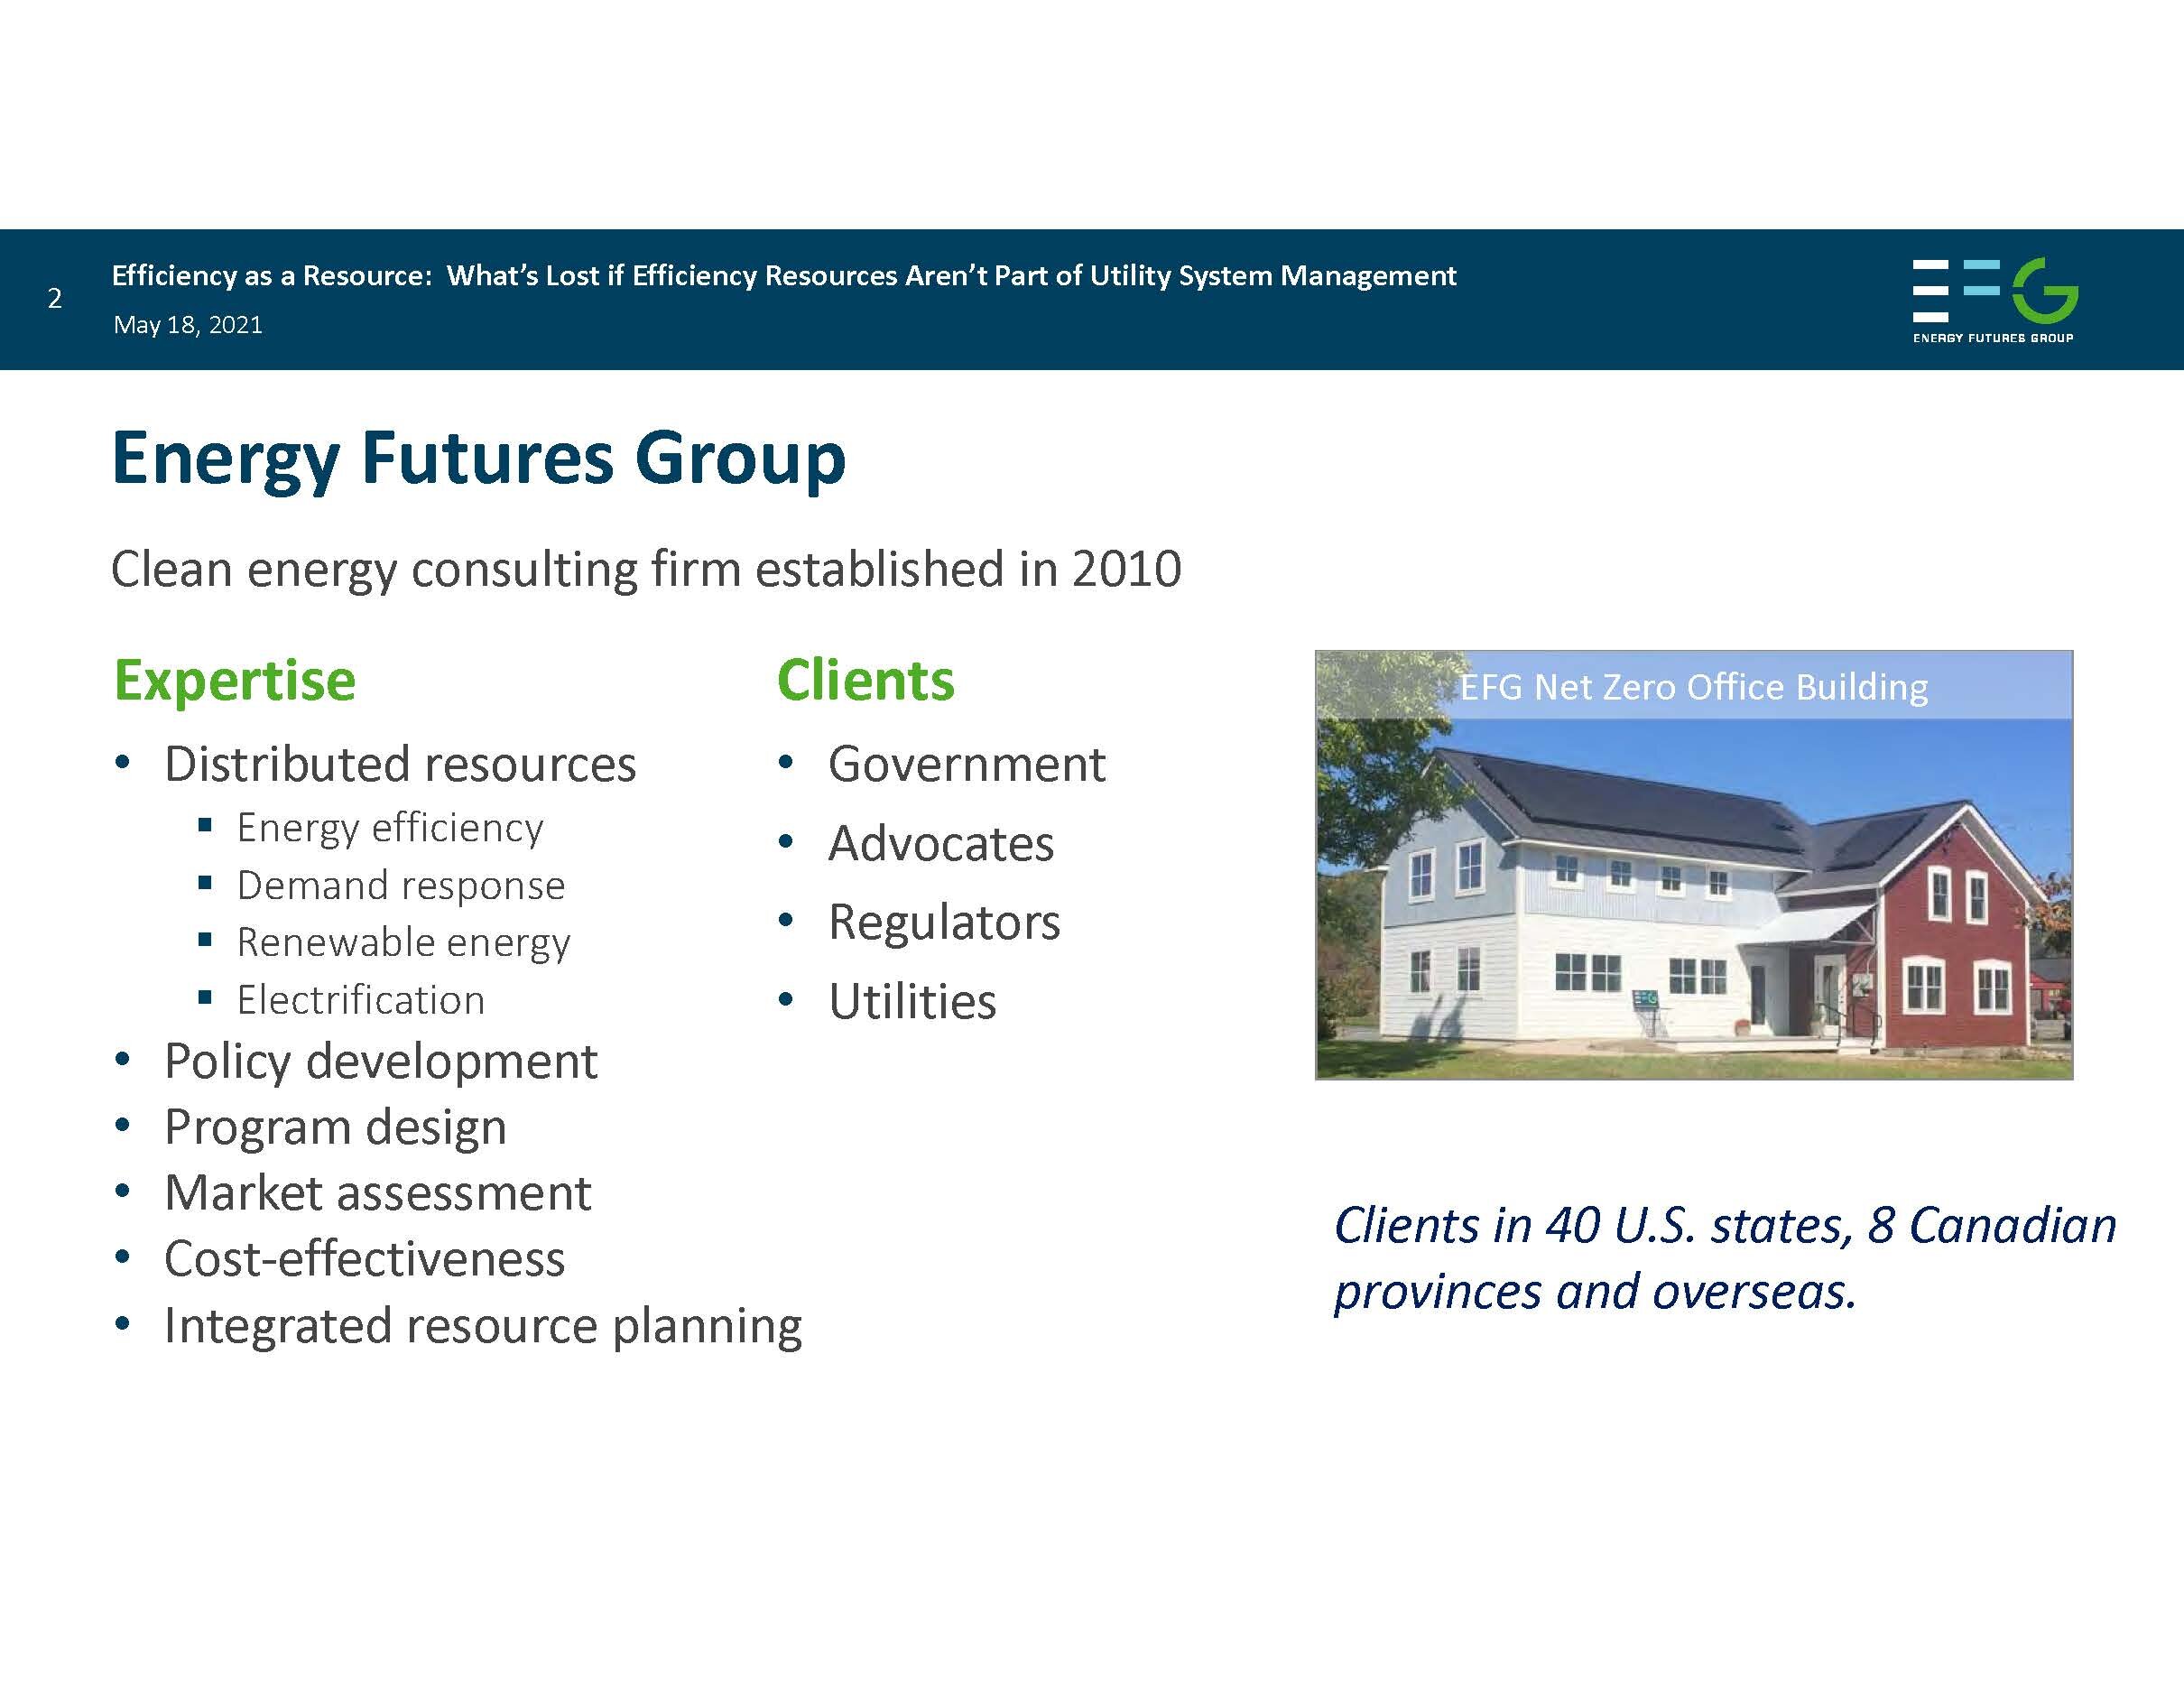 Energy Efficiency as a Resource Chris Neme Energy Futures_Page_02.jpg